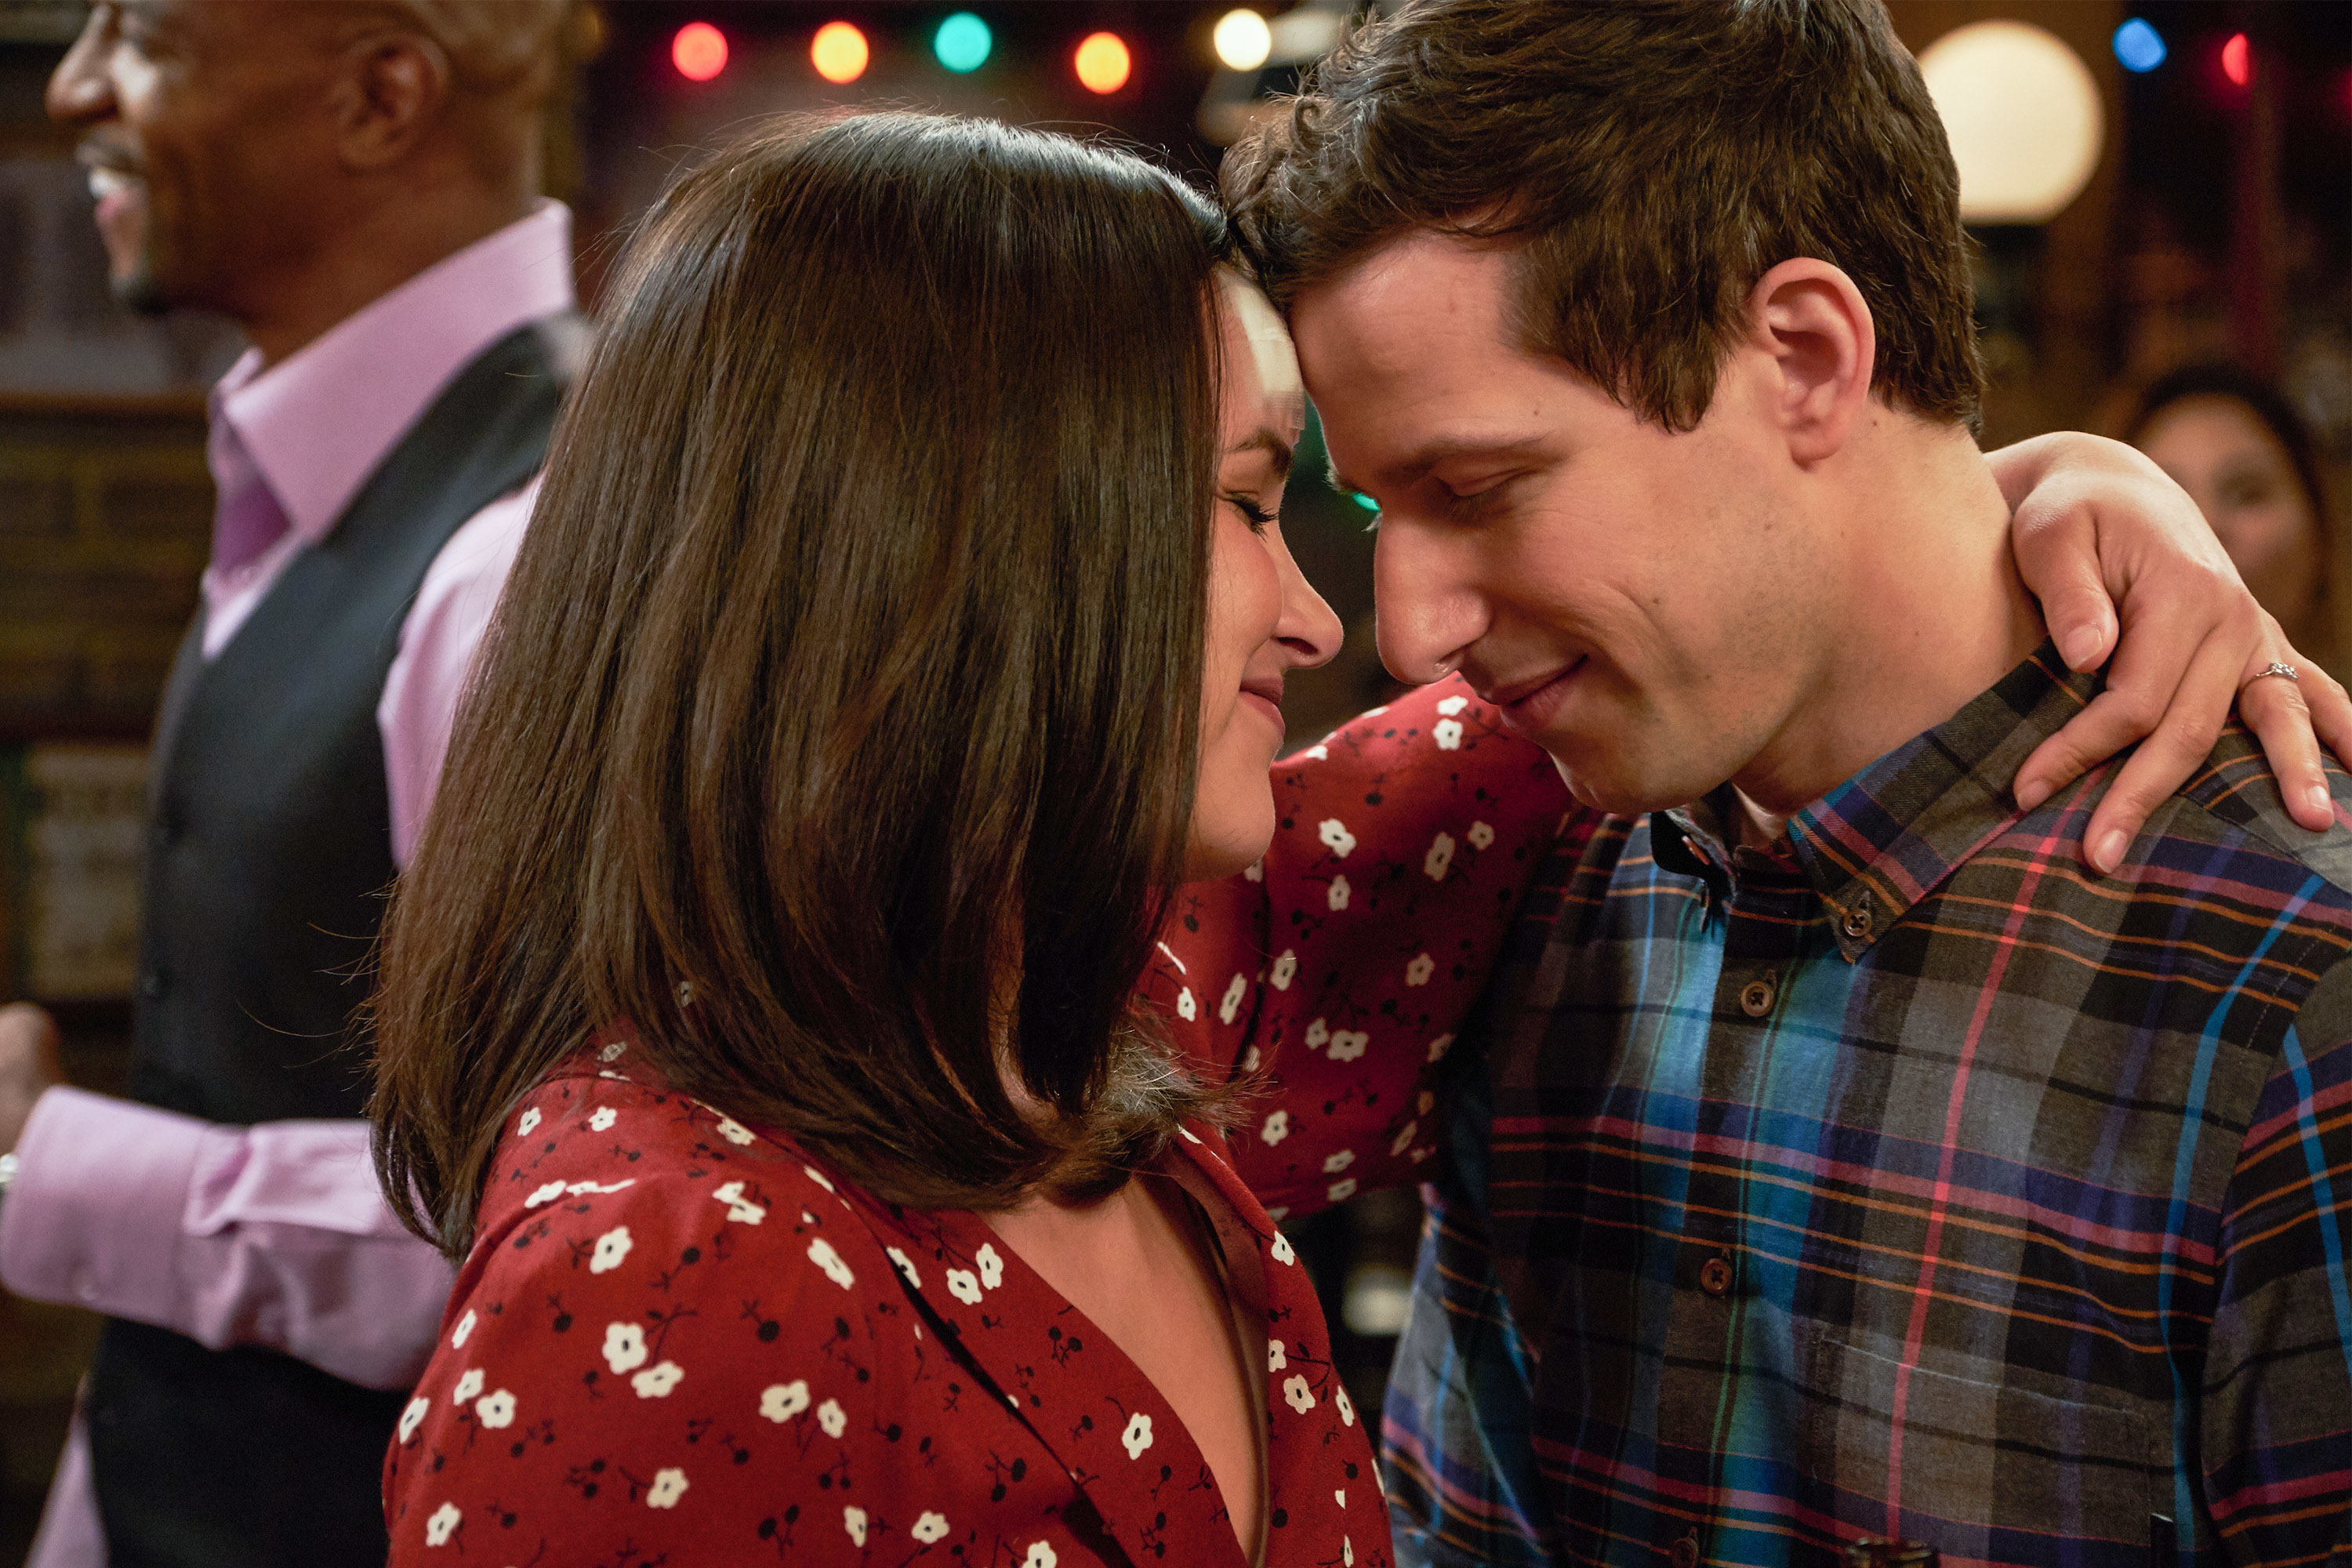 Melissa Fumero embraces Andy Samberg while dancing at a party